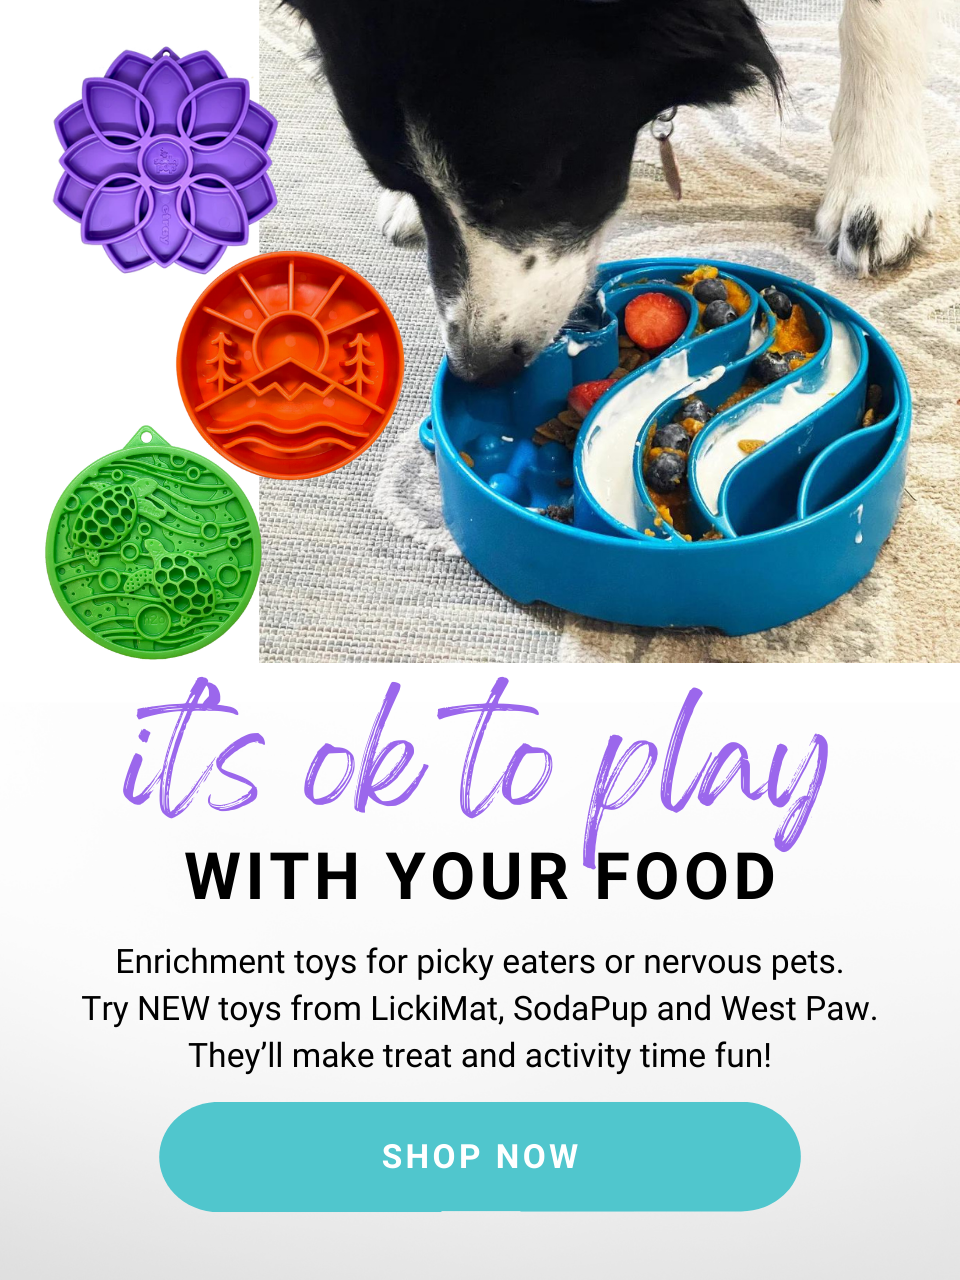 Enrichment toys for picky eaters, calming anxious pets or mealtime fun! Shop the collection now!